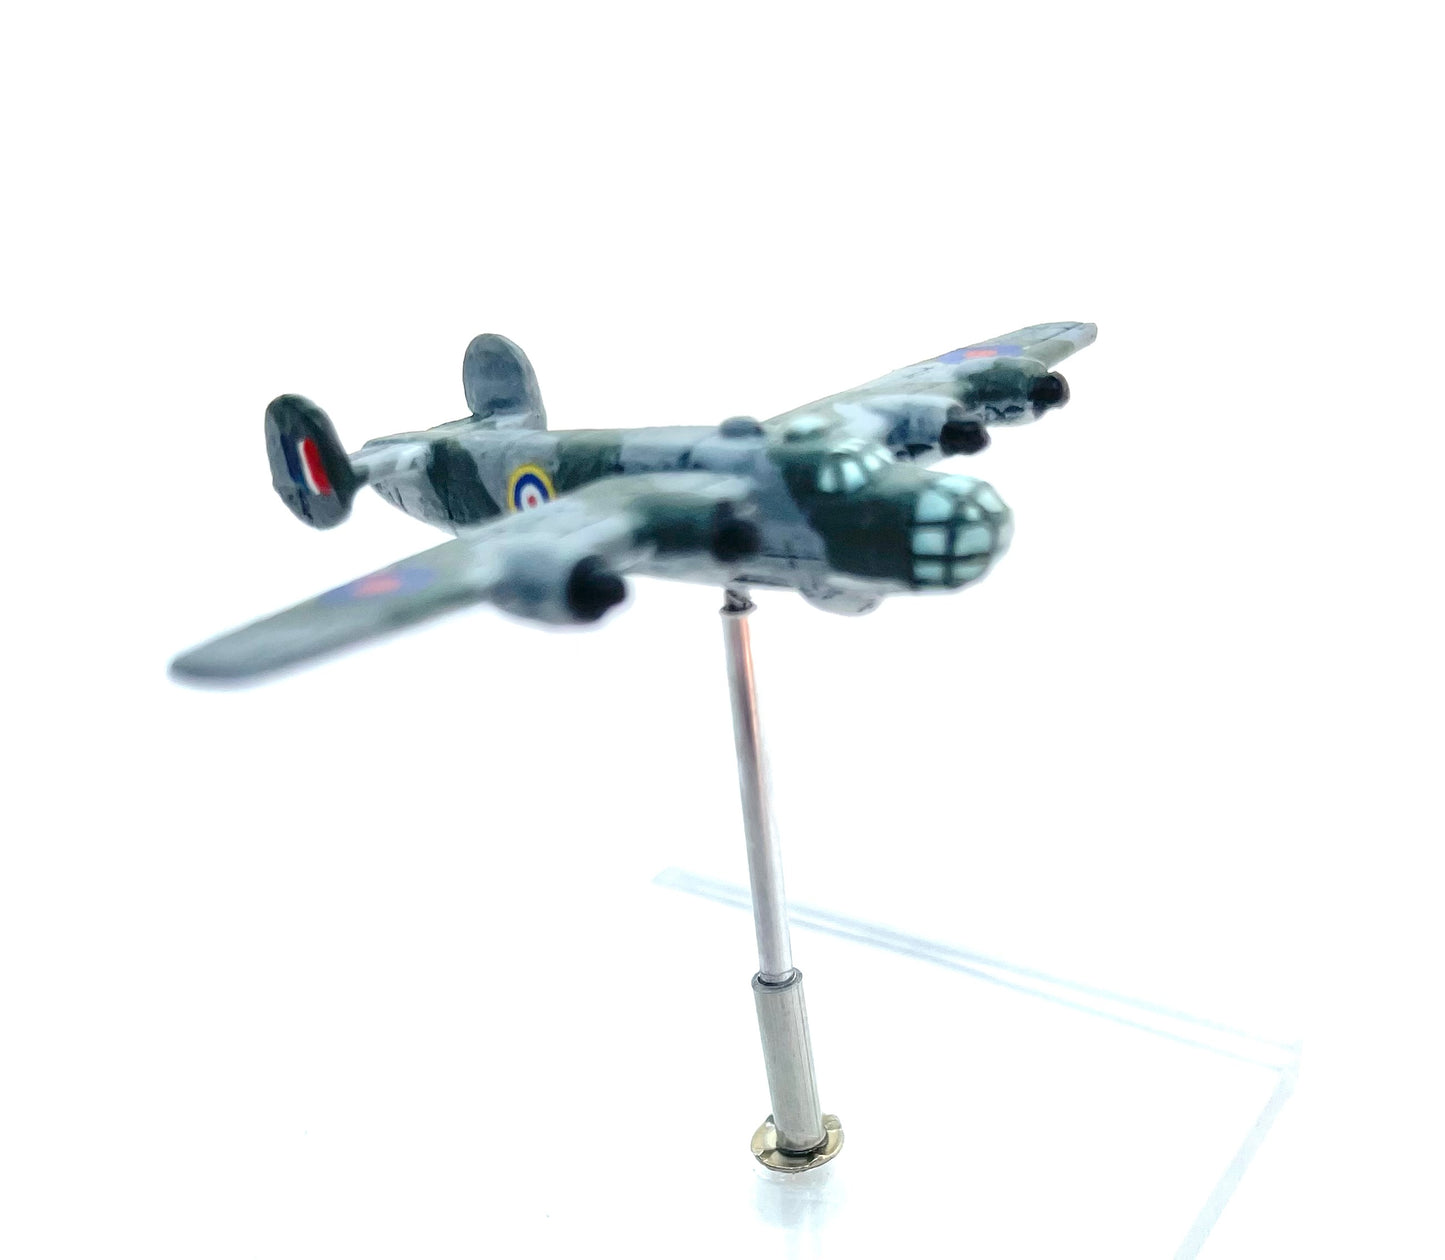 ISA81 B24 Consolidated Liberator GR 1 x2